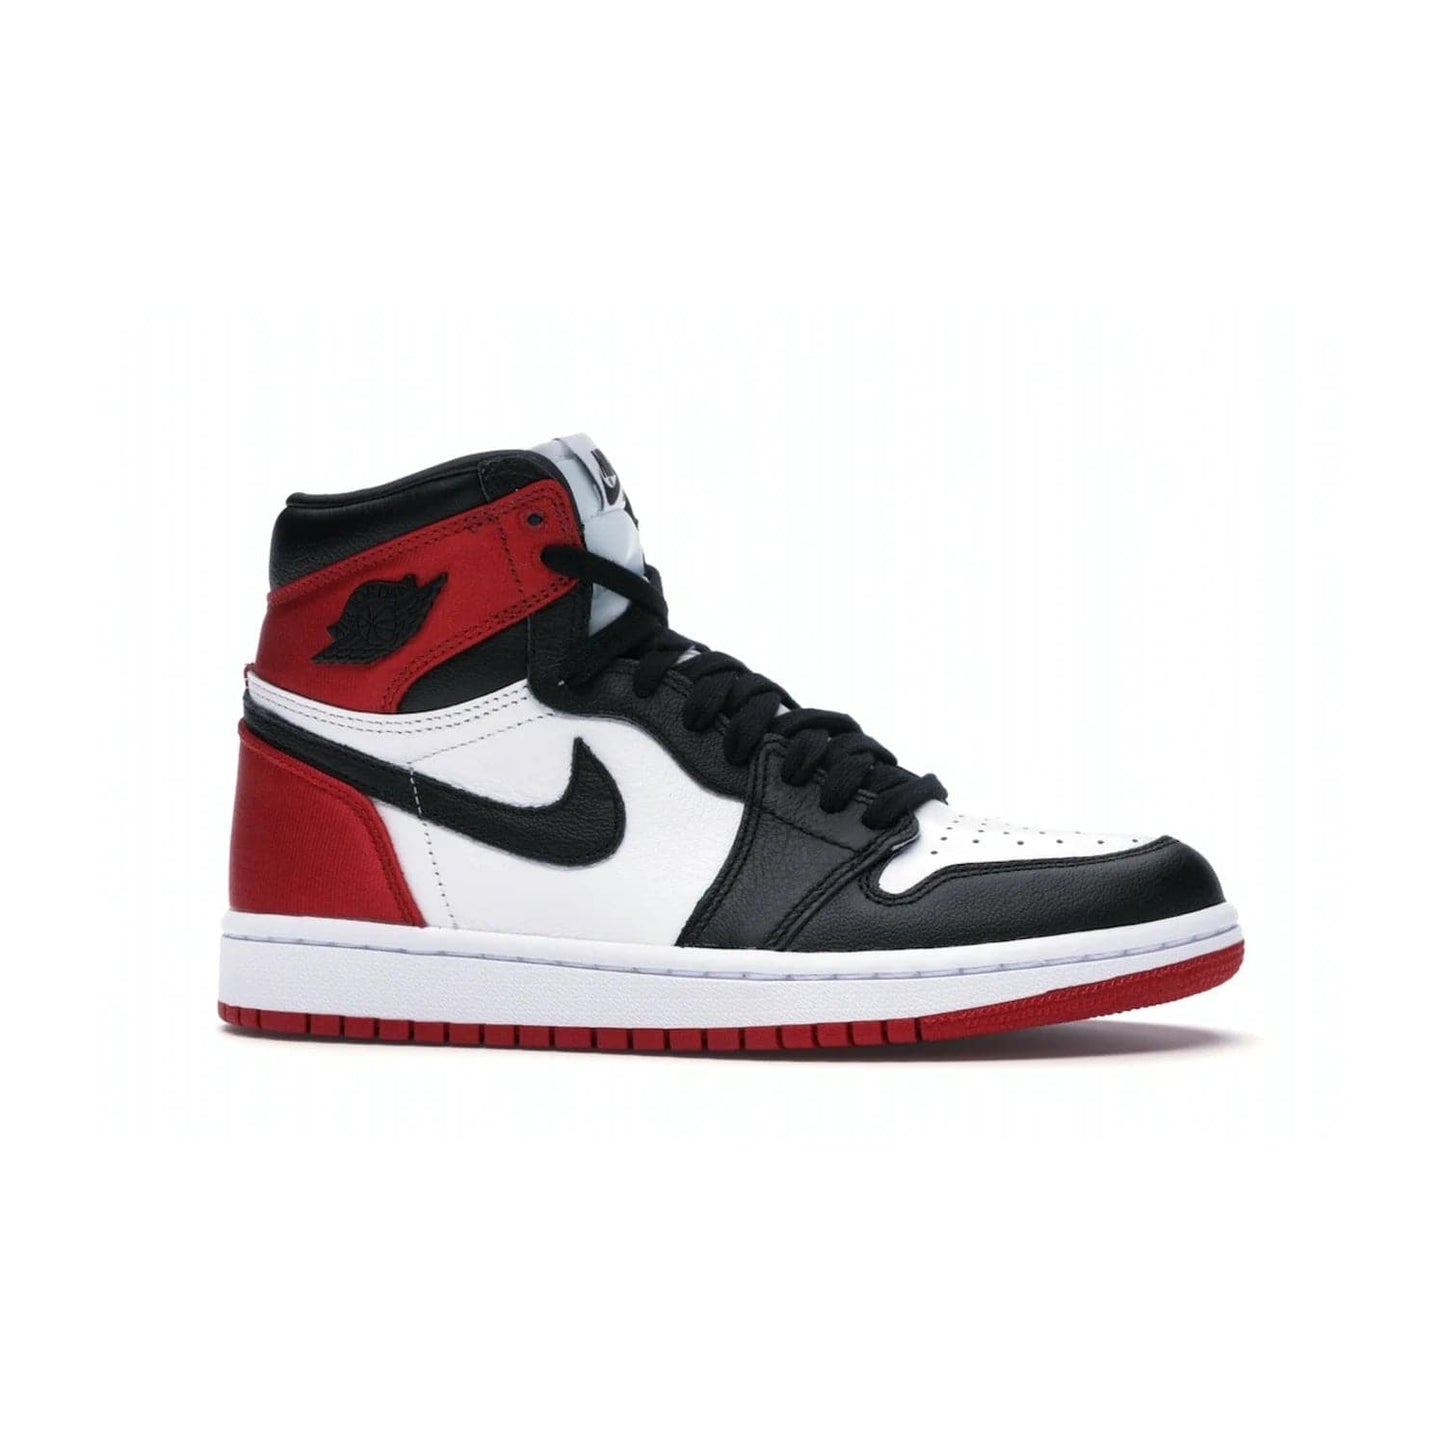 Jordan 1 Retro High Satin Black Toe (Women's) - Image 2 - Only at www.BallersClubKickz.com - Luxurious take on the timeless Air Jordan 1. Features a mix of black leather and satin materials with subtle University Red accents. Elevated look with metal Wings logo on the heel. Released in August 2019.